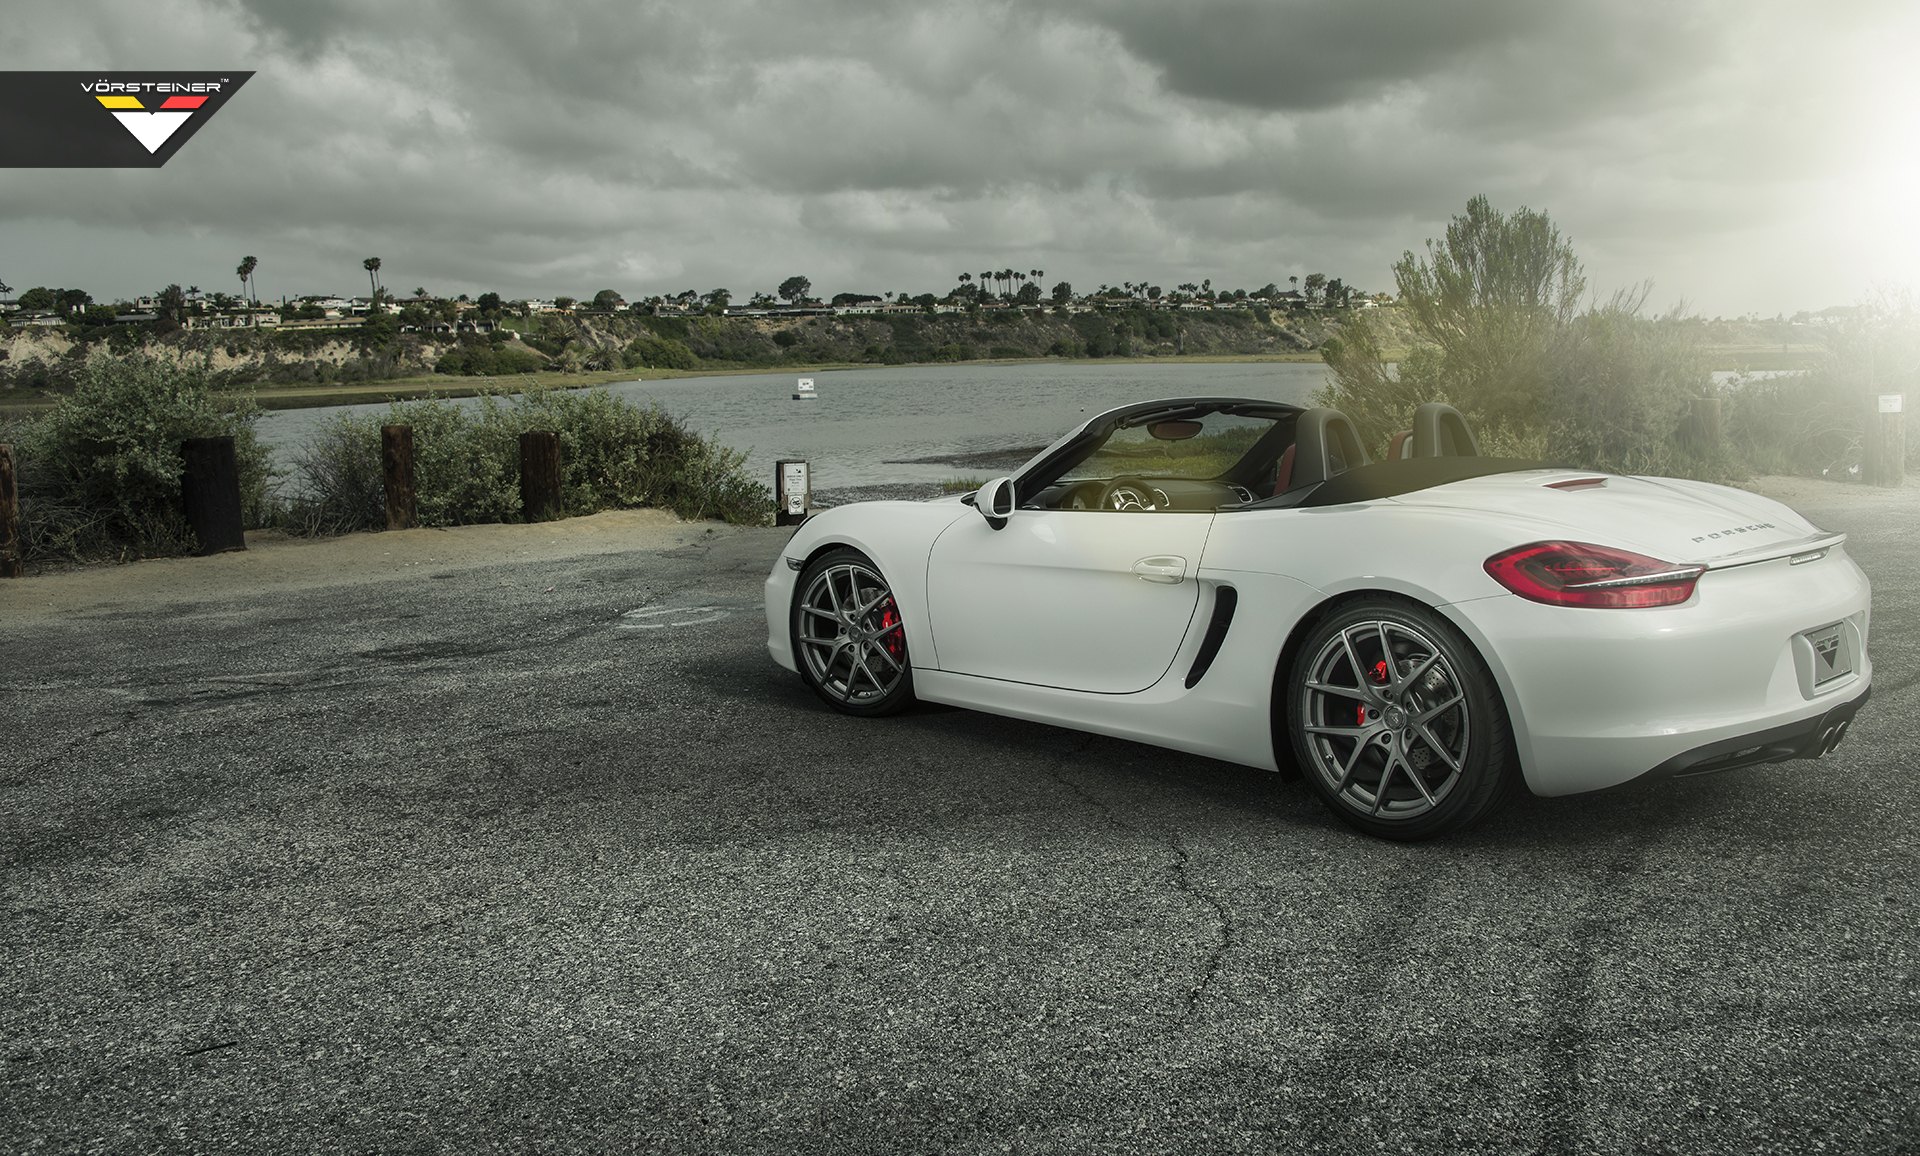 Red LED Taillights on White Convertible Porsche Boxster - Photo by Vorstiner